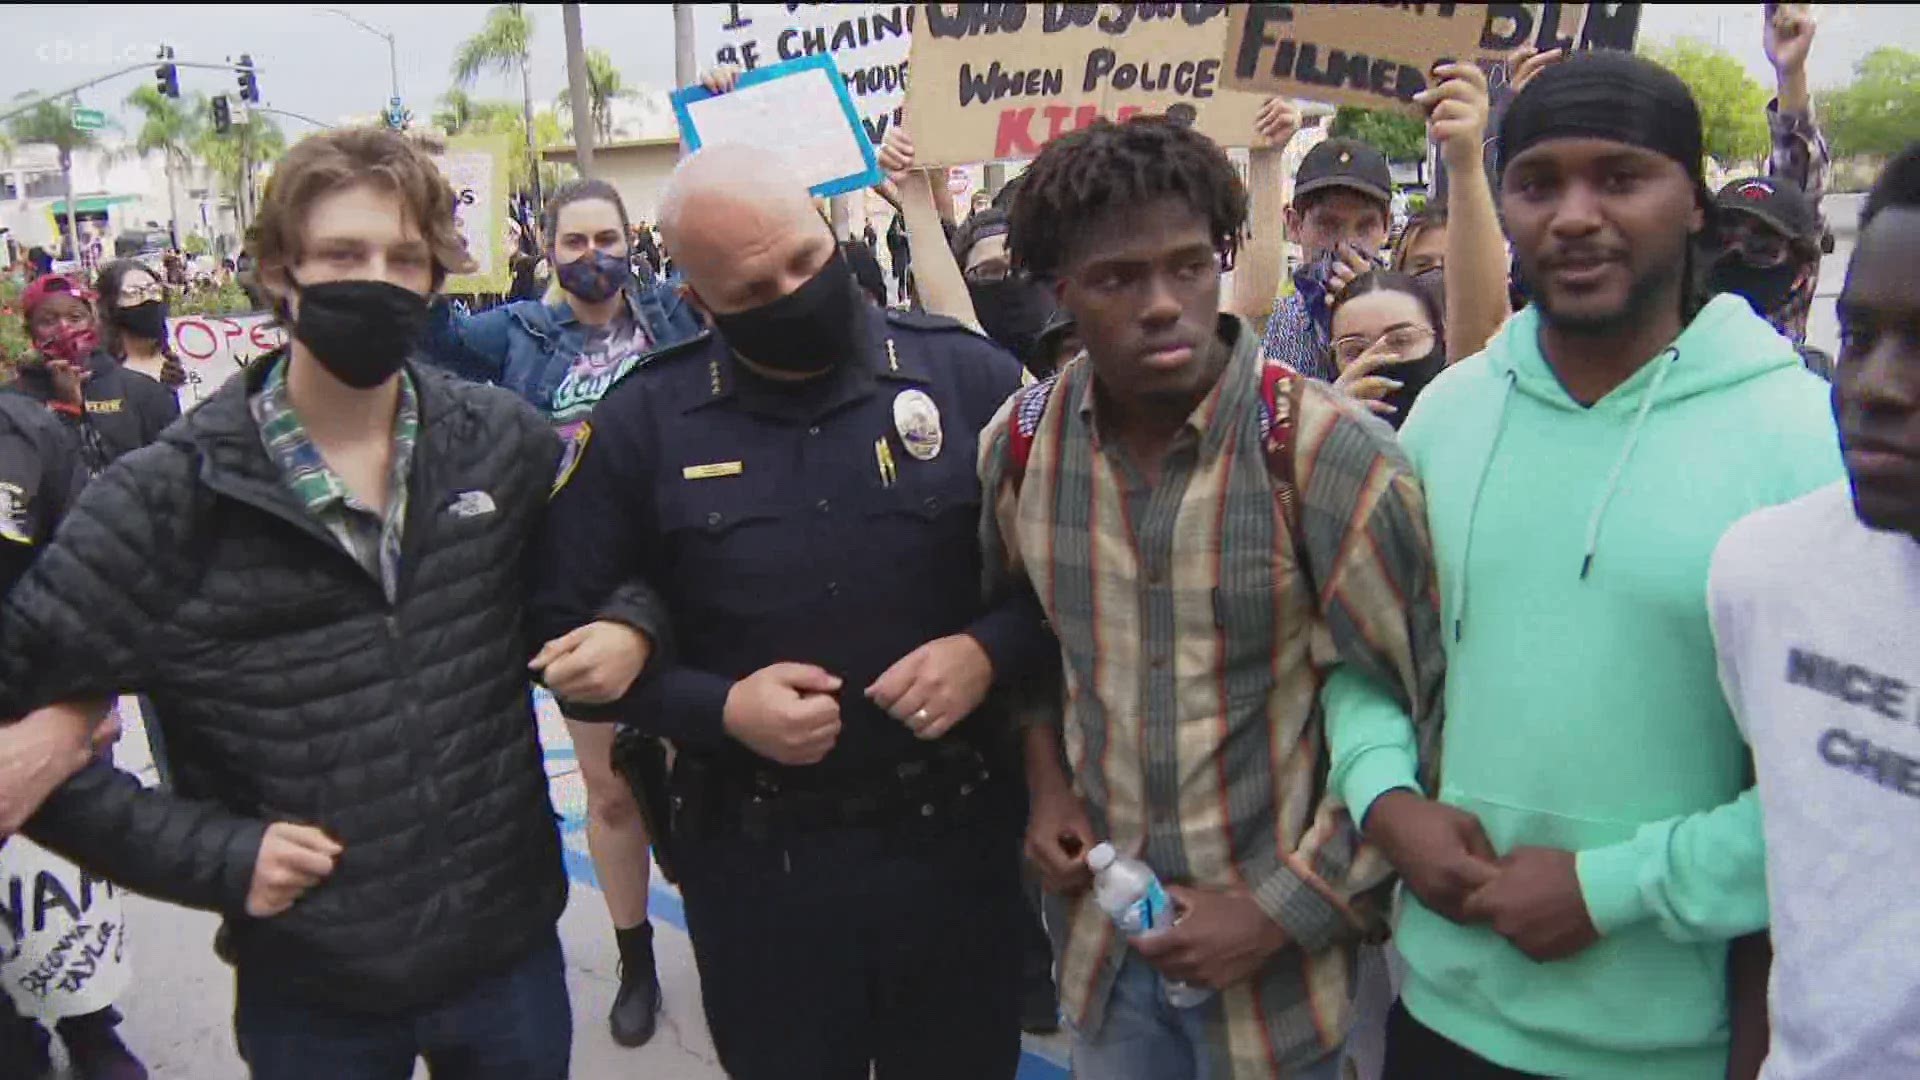 Thousands of San Diegans marched across county against police brutality and chanting, Black Lives Matter.